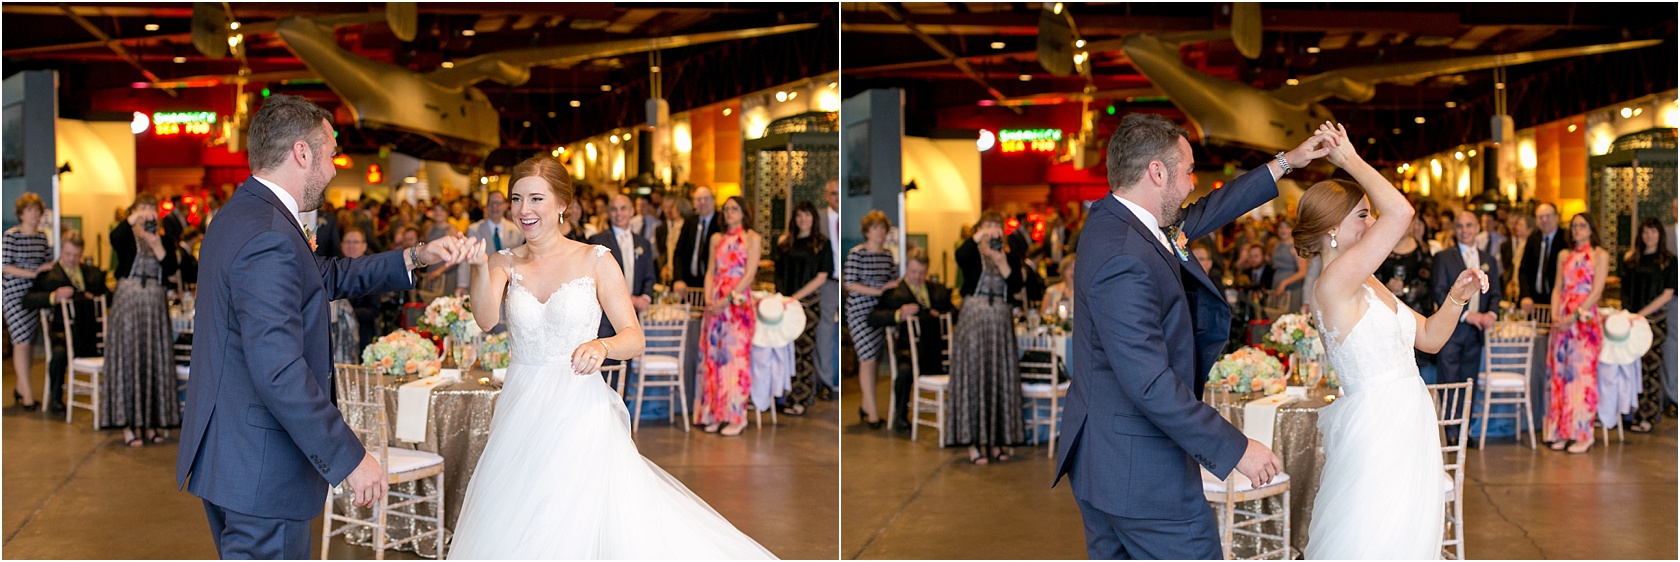 Rowland Baltimore Museum of Industry Wedding Living Radiant Photography photos_0133.jpg